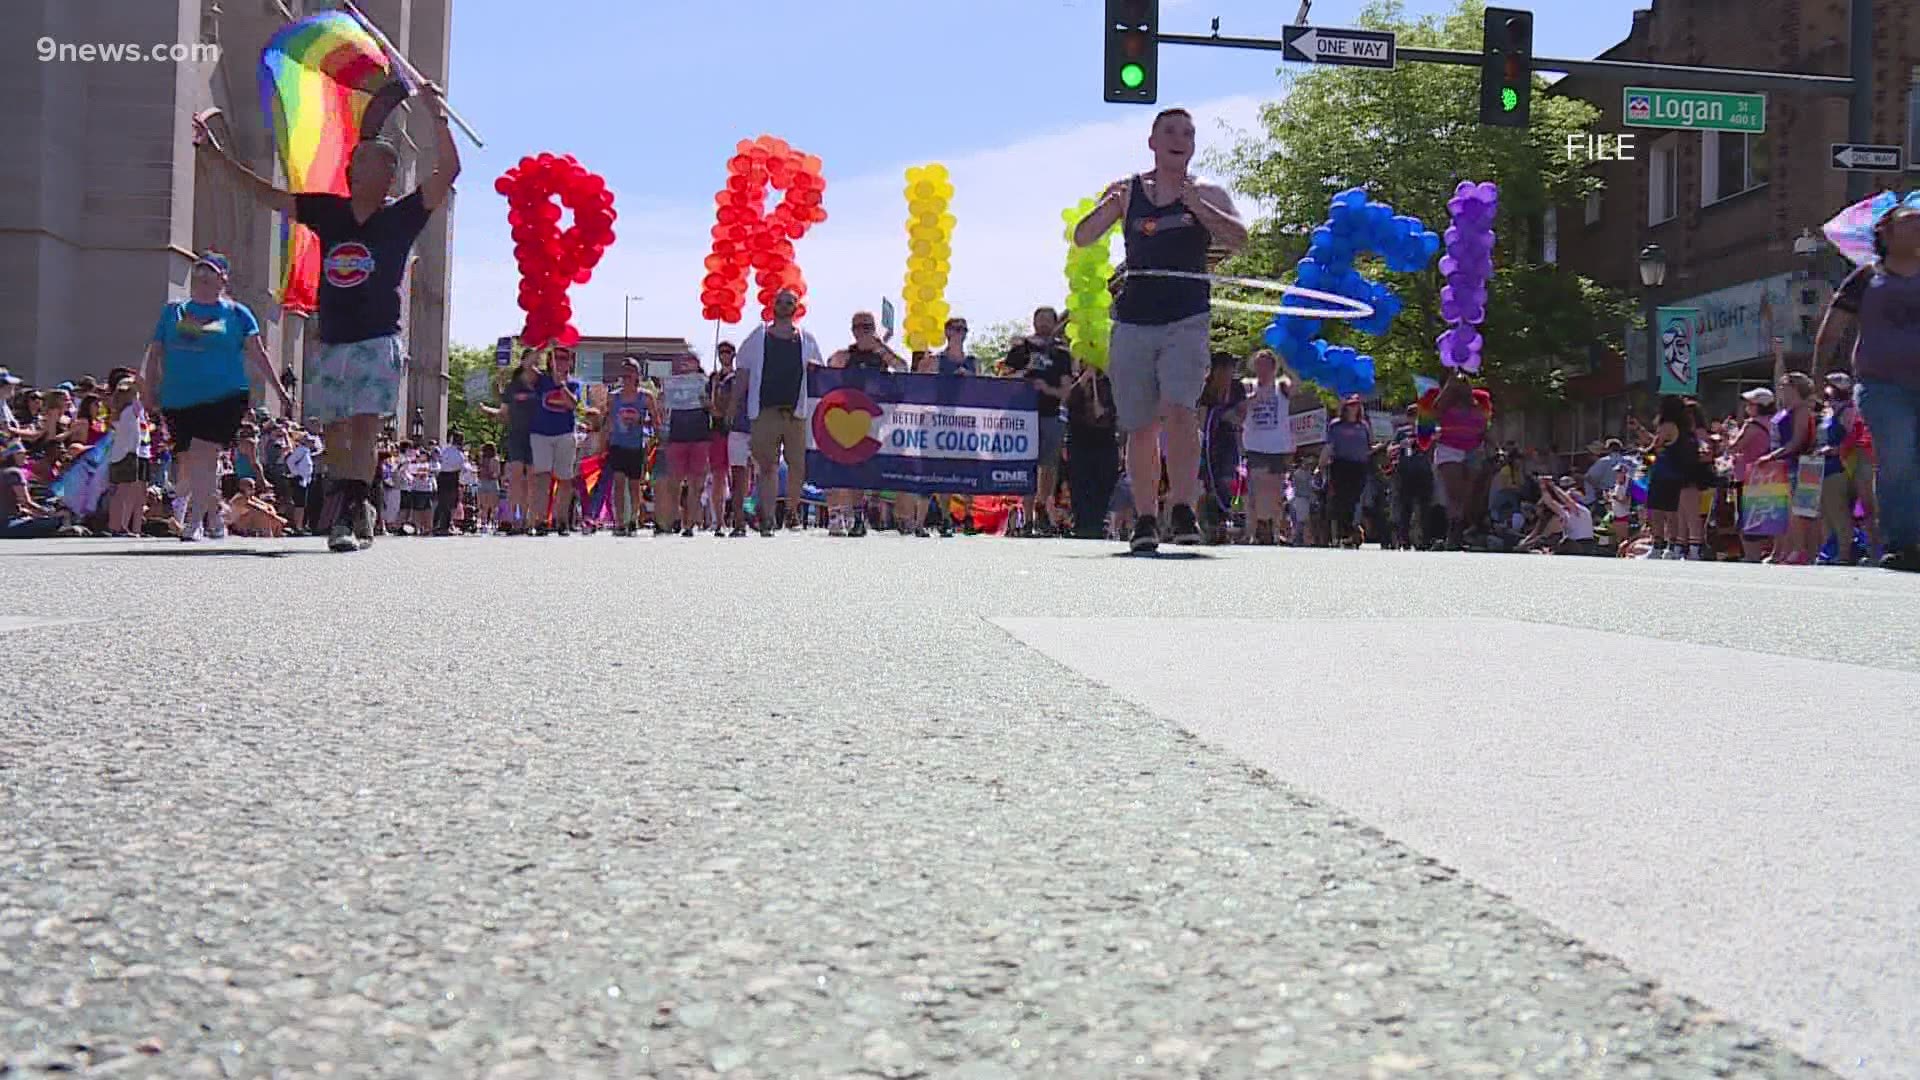 Denver Pride organizers are planning events both in-person and virtual for their 2021 celebration.